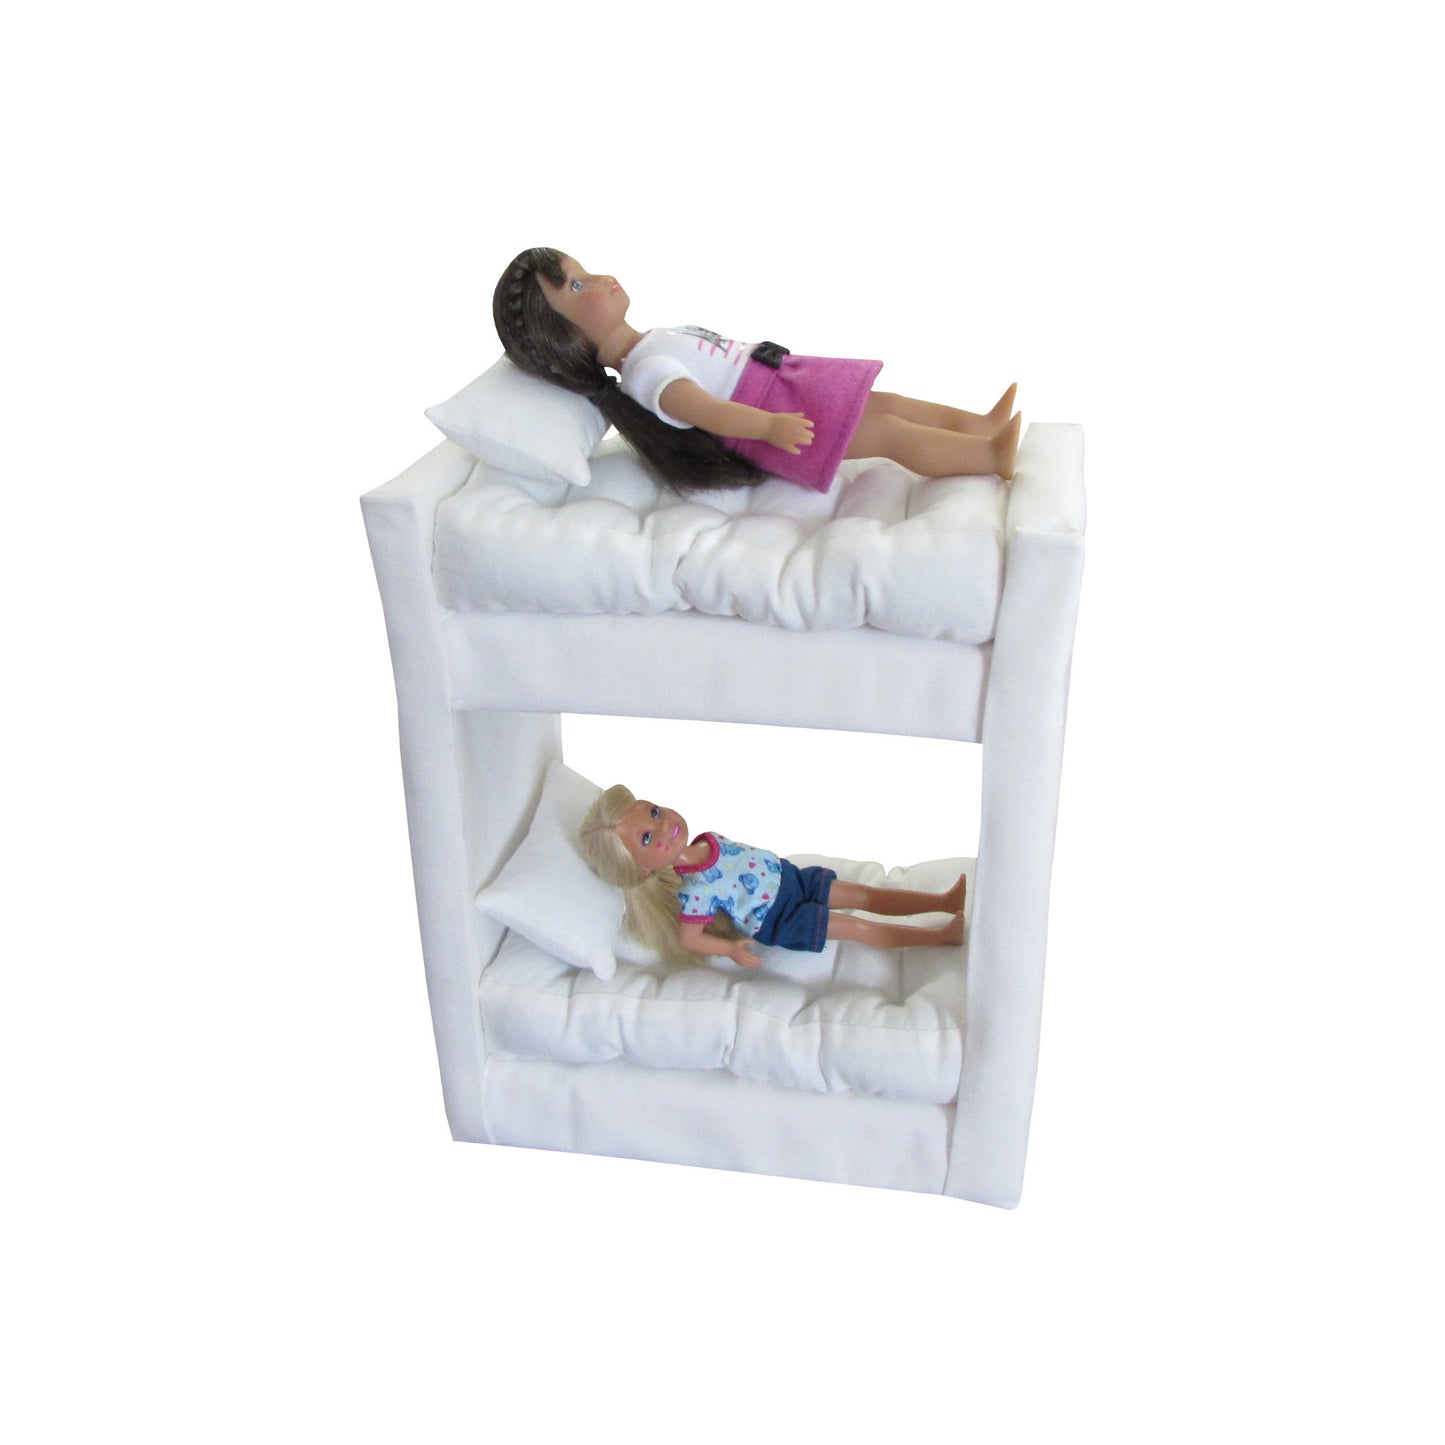 Upholstered White Doll Bunk Bed for 6.5-inch dolls with dolls Second view